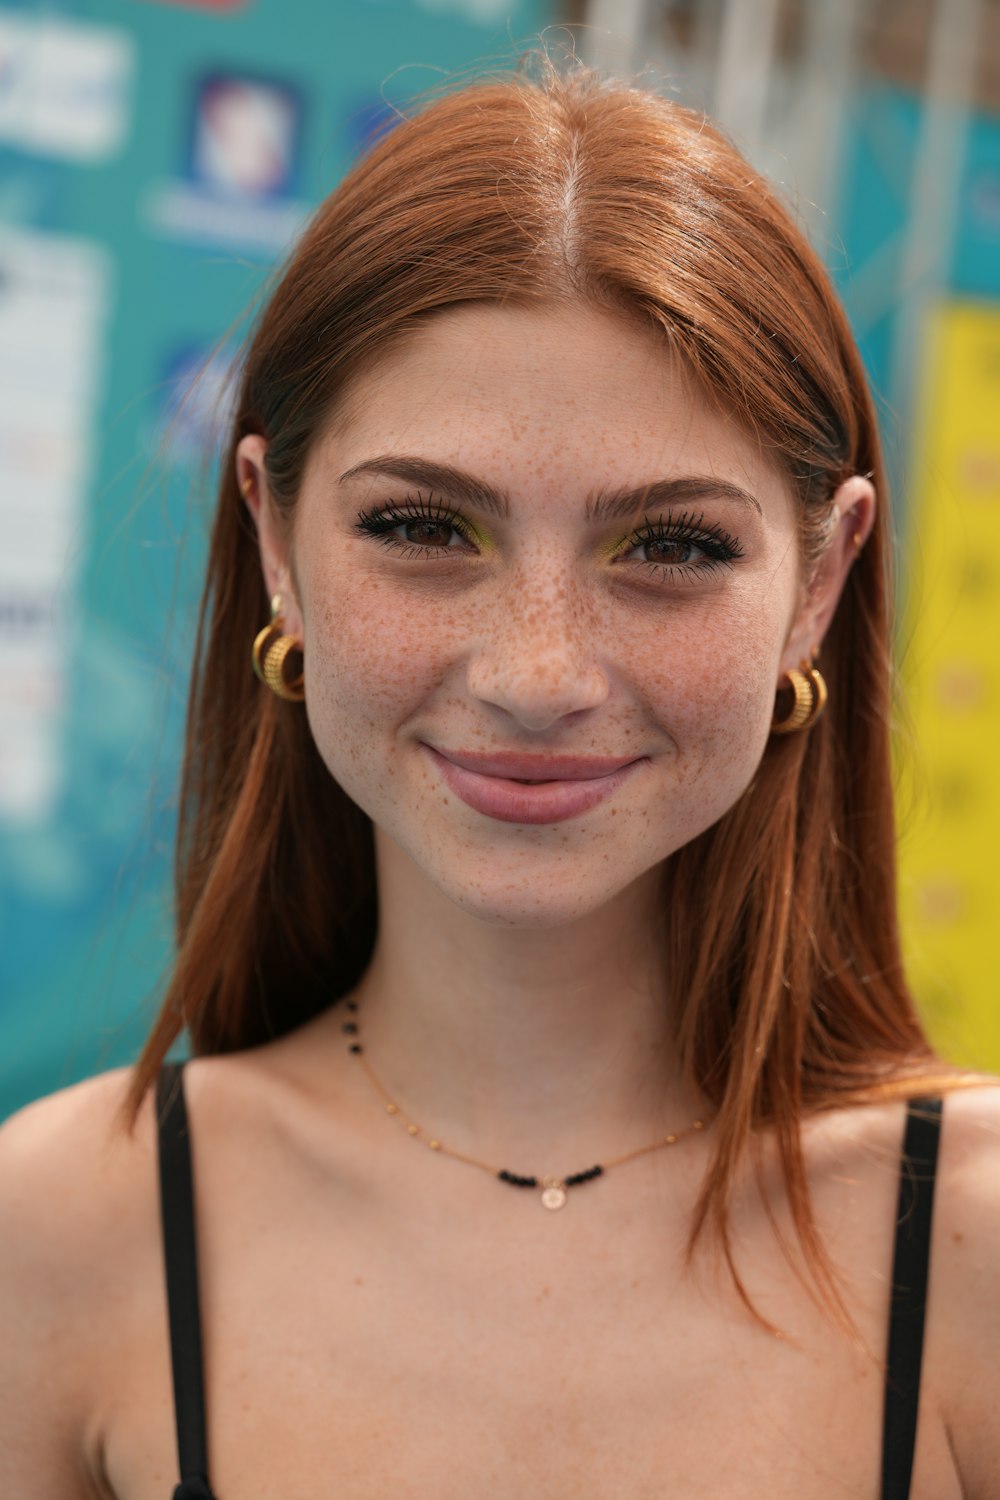 a woman with freckles and a black bra smiling